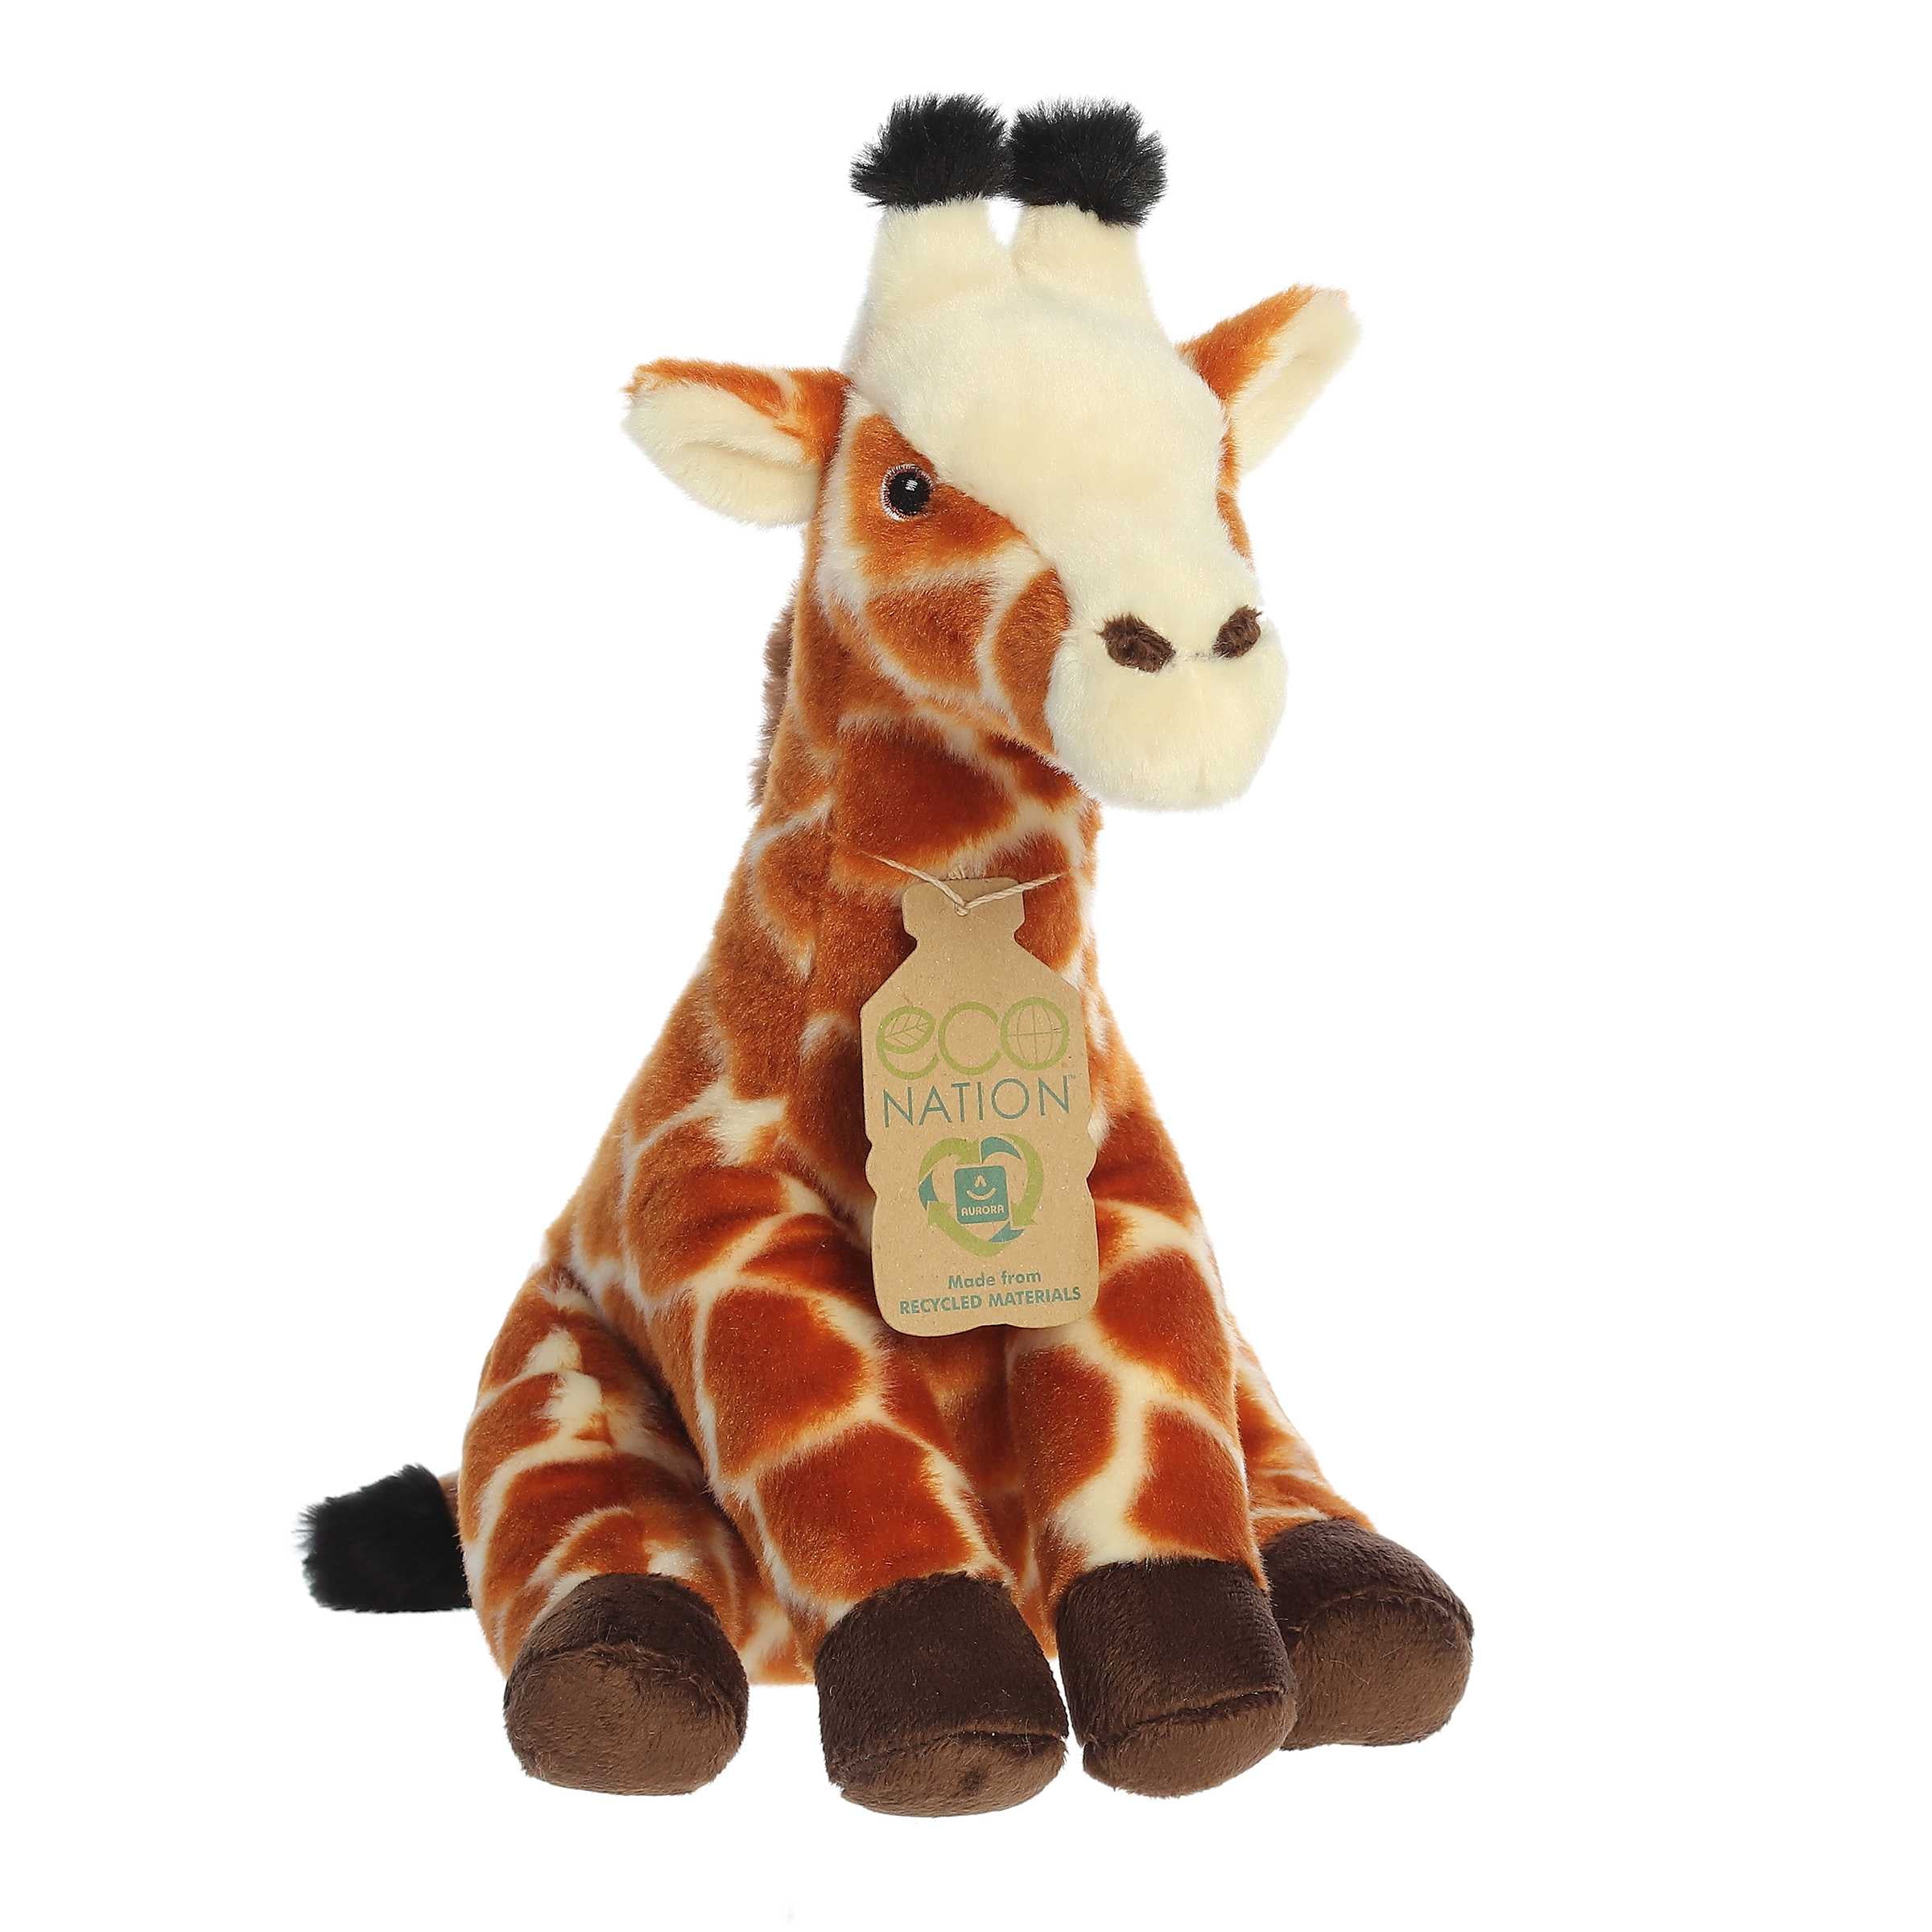 Aurora Eco Hugs Giraffe Plush, with lifelike pattern and soft fur, made from recycled materials for eco-conscious care.